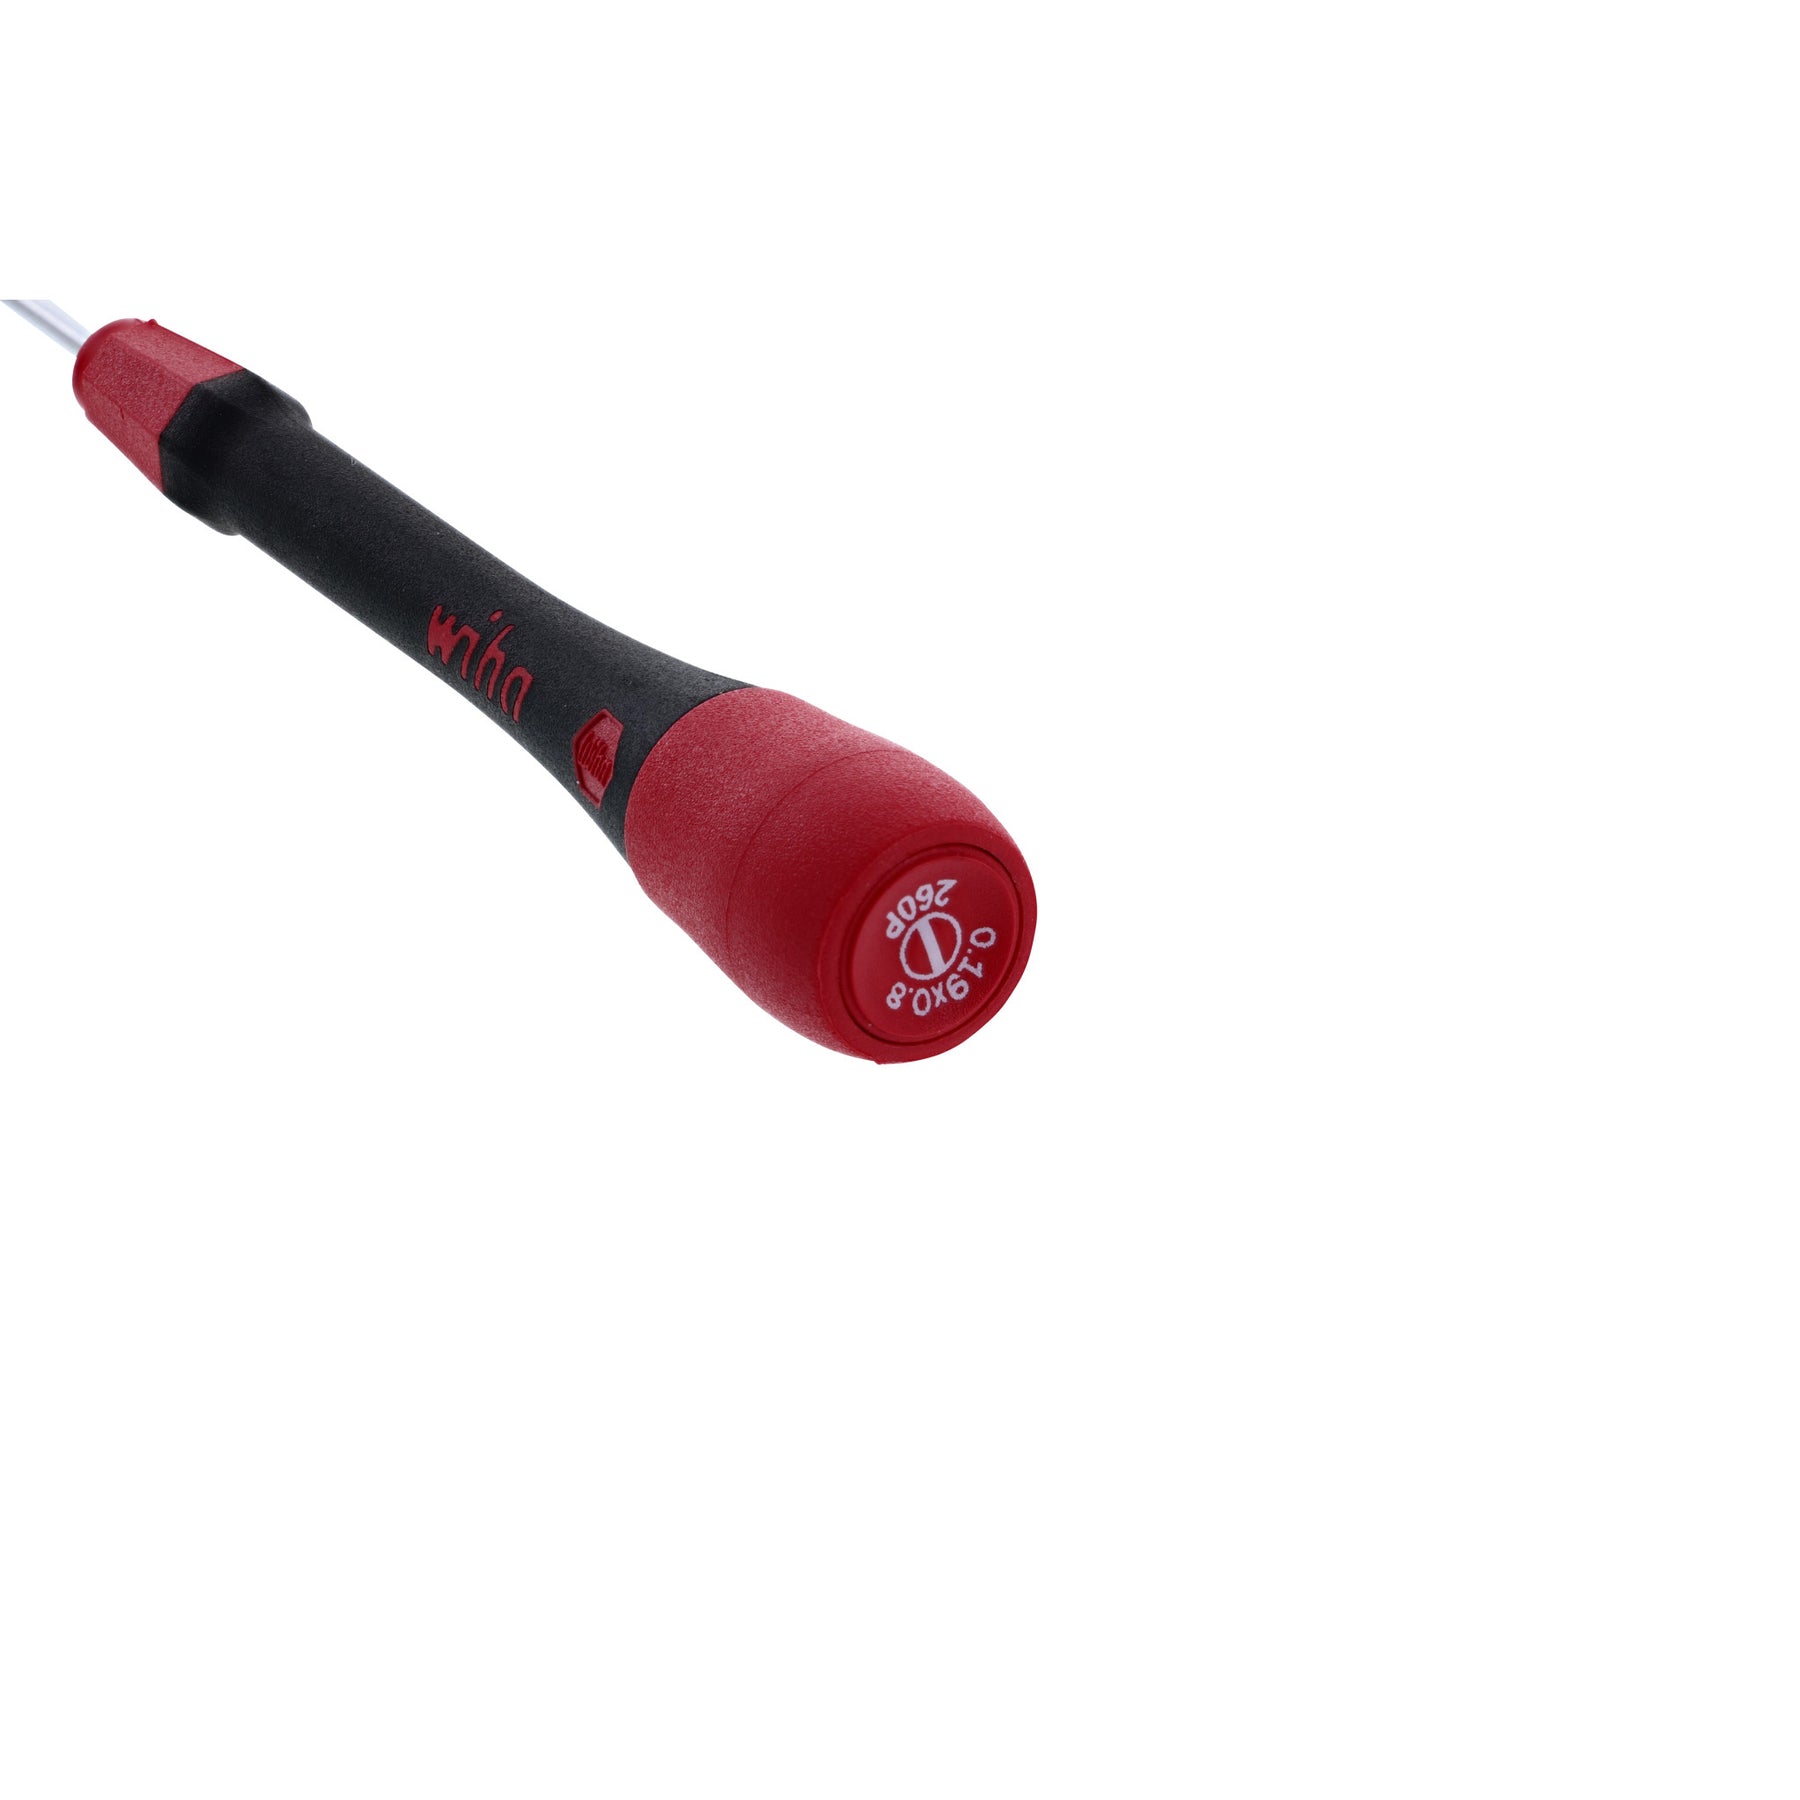 PicoFinish Slotted Screwdriver .8mm x 40mm